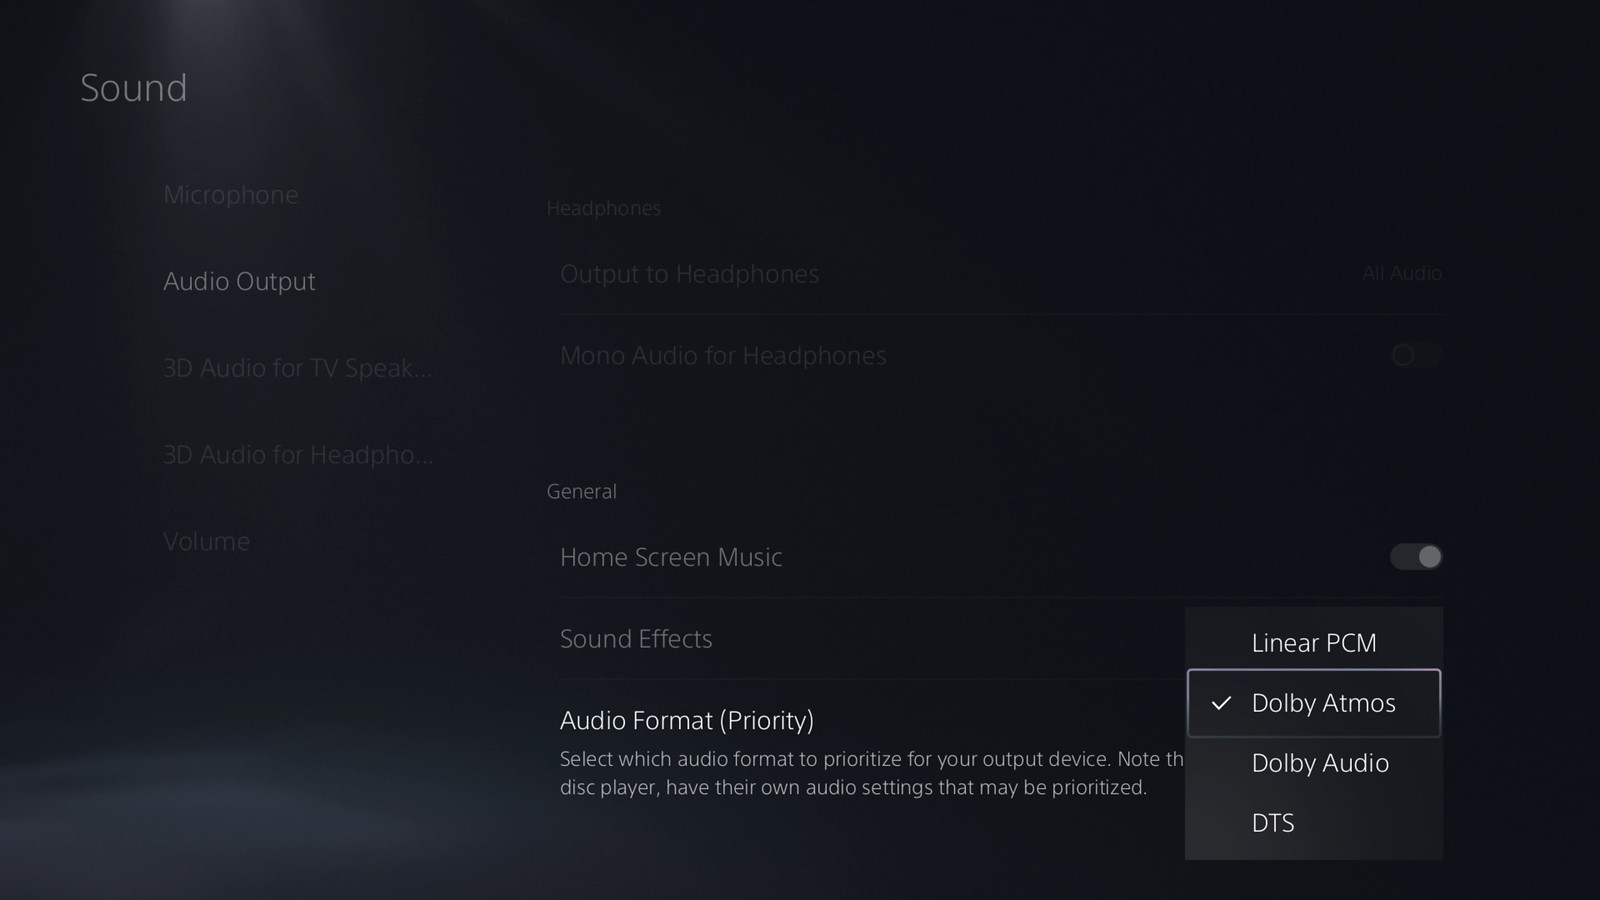 PS5 UI screenshot showing the option to select Dolby Atmos.